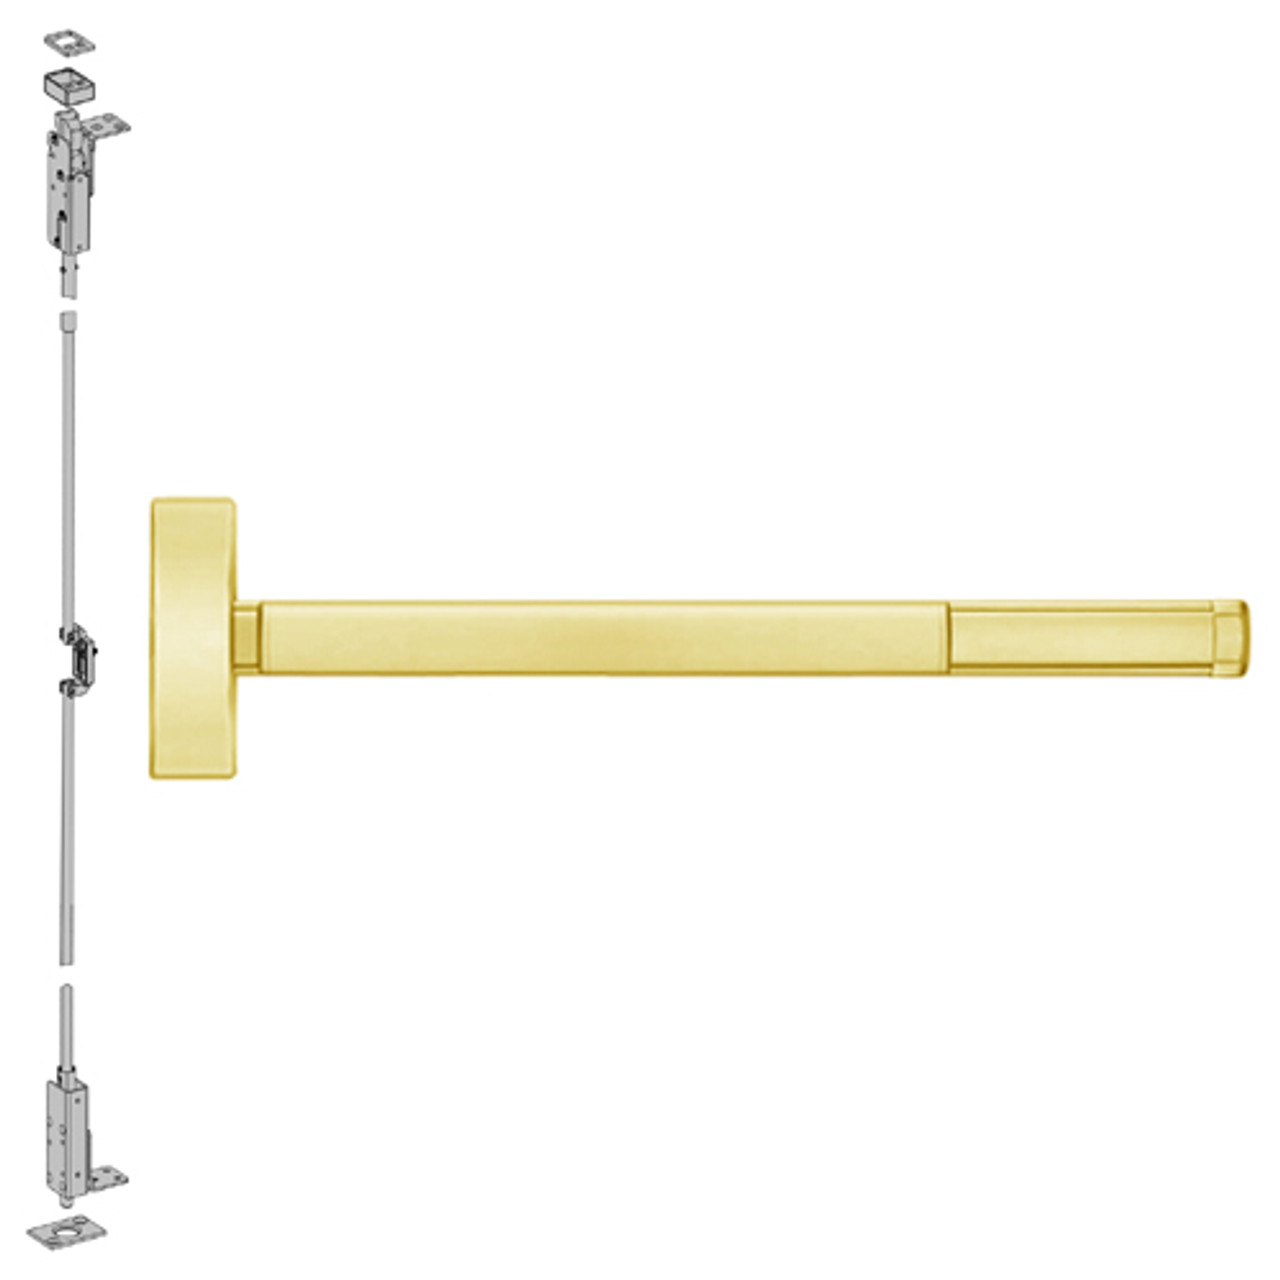 FL2714LBR-605-48 PHI 2700 Series Fire Rated Wood Door Concealed Vertical Exit Device Prepped for Lever-Knob Always Active in Bright Brass Finish